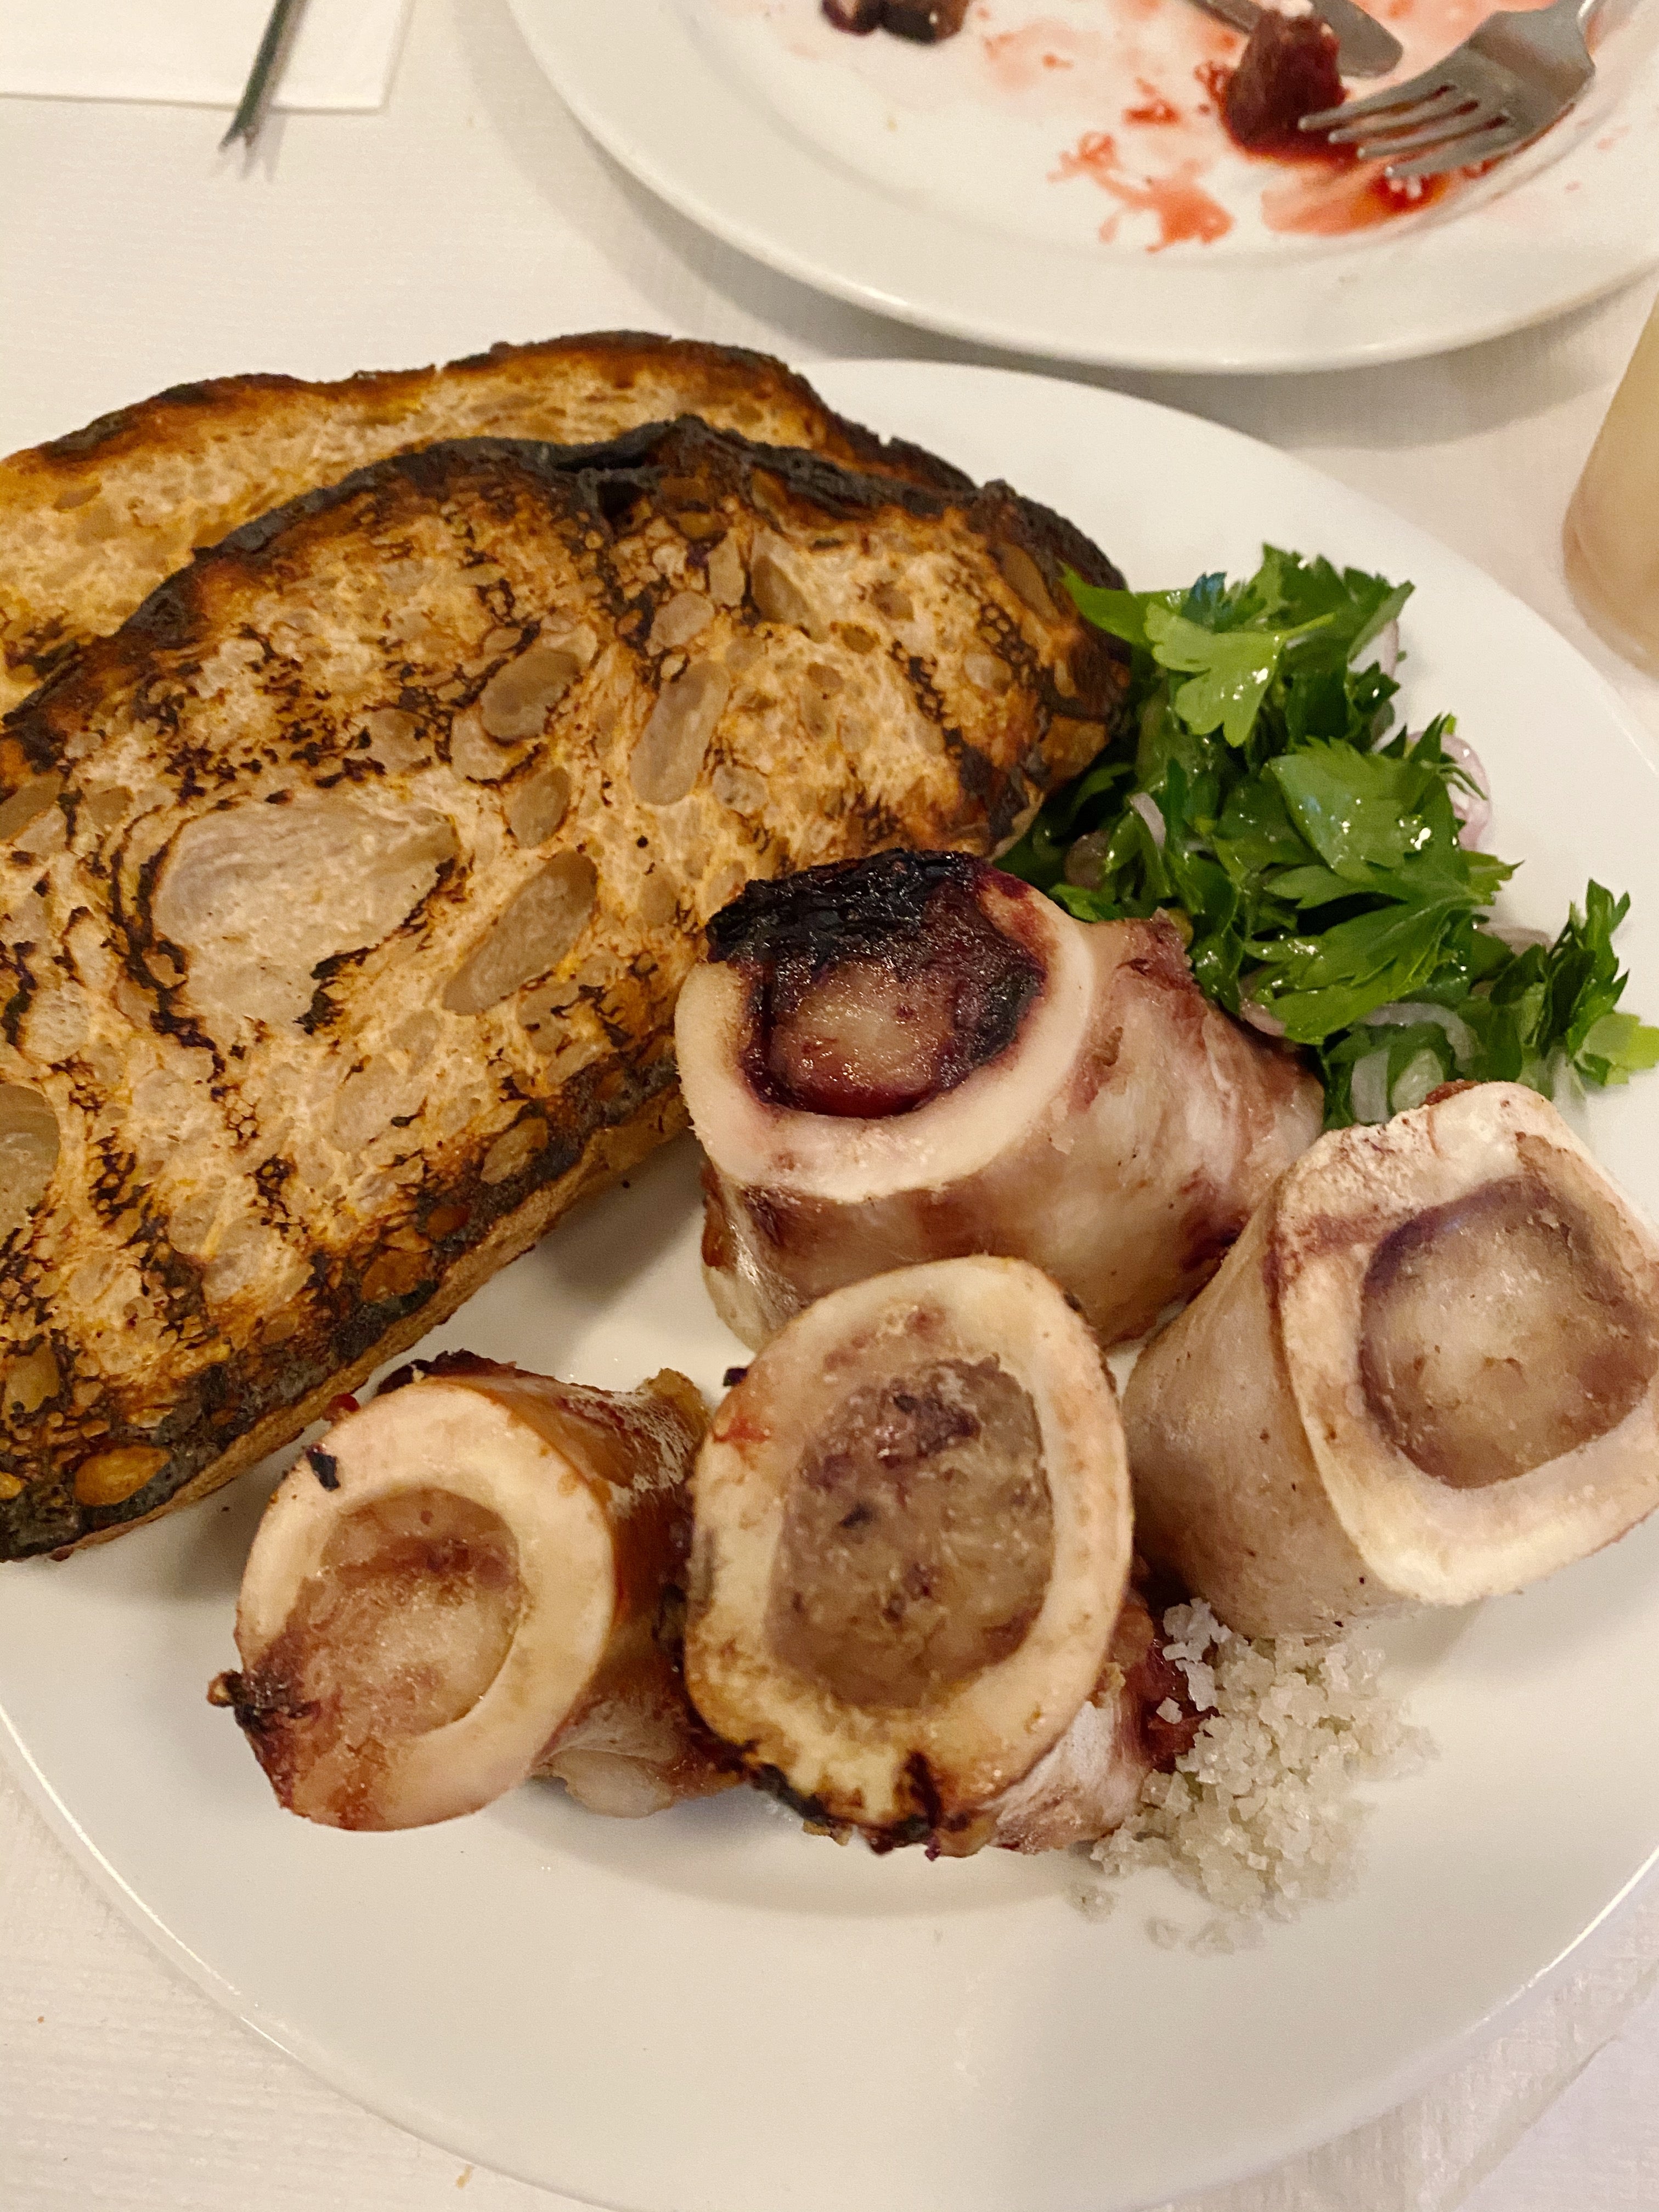 The bone marrow has been on the menu for 26 years – and for good reason